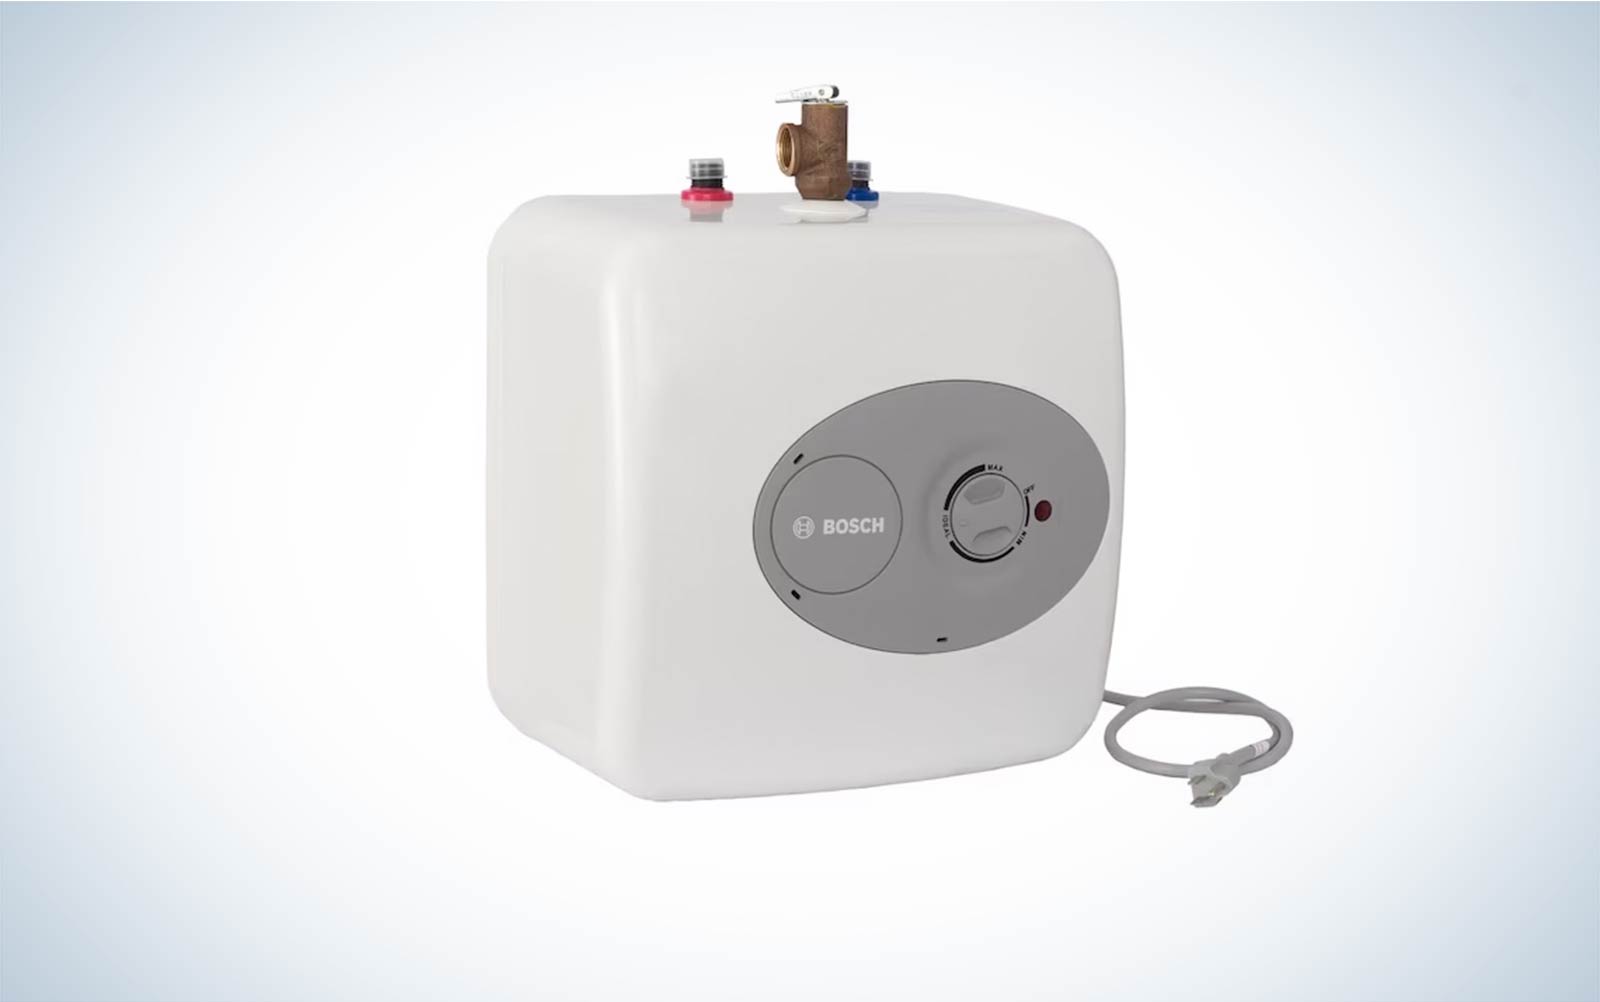 Bosch Tronic Point-Of-Use Water Heater on a plain background